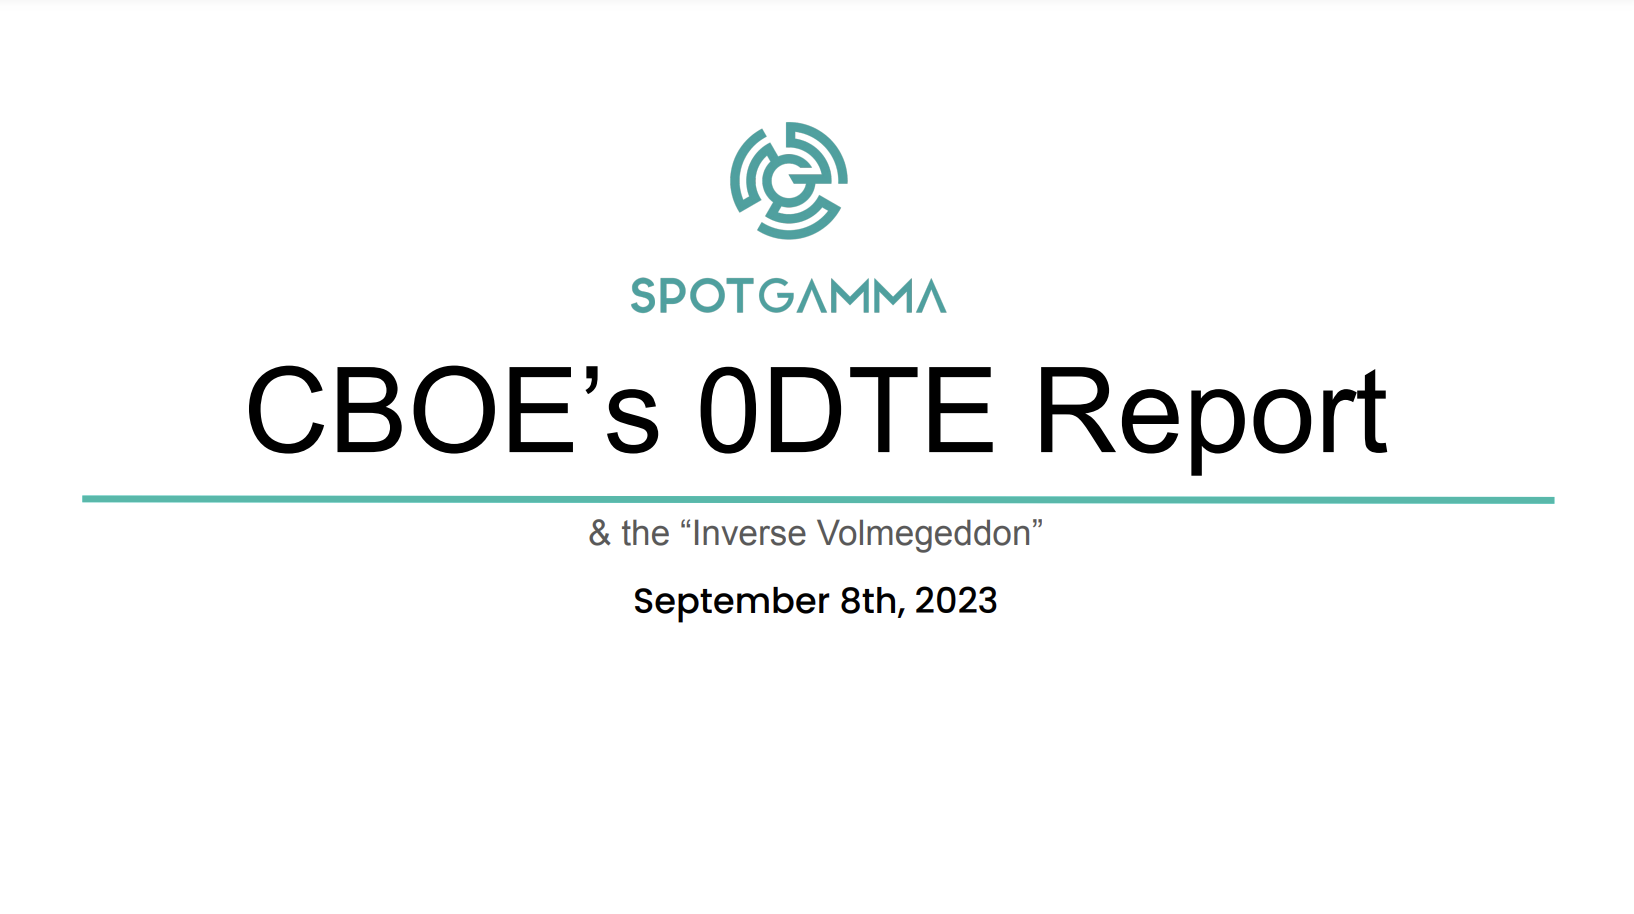 Analysis: The CBOE 0DTE Report